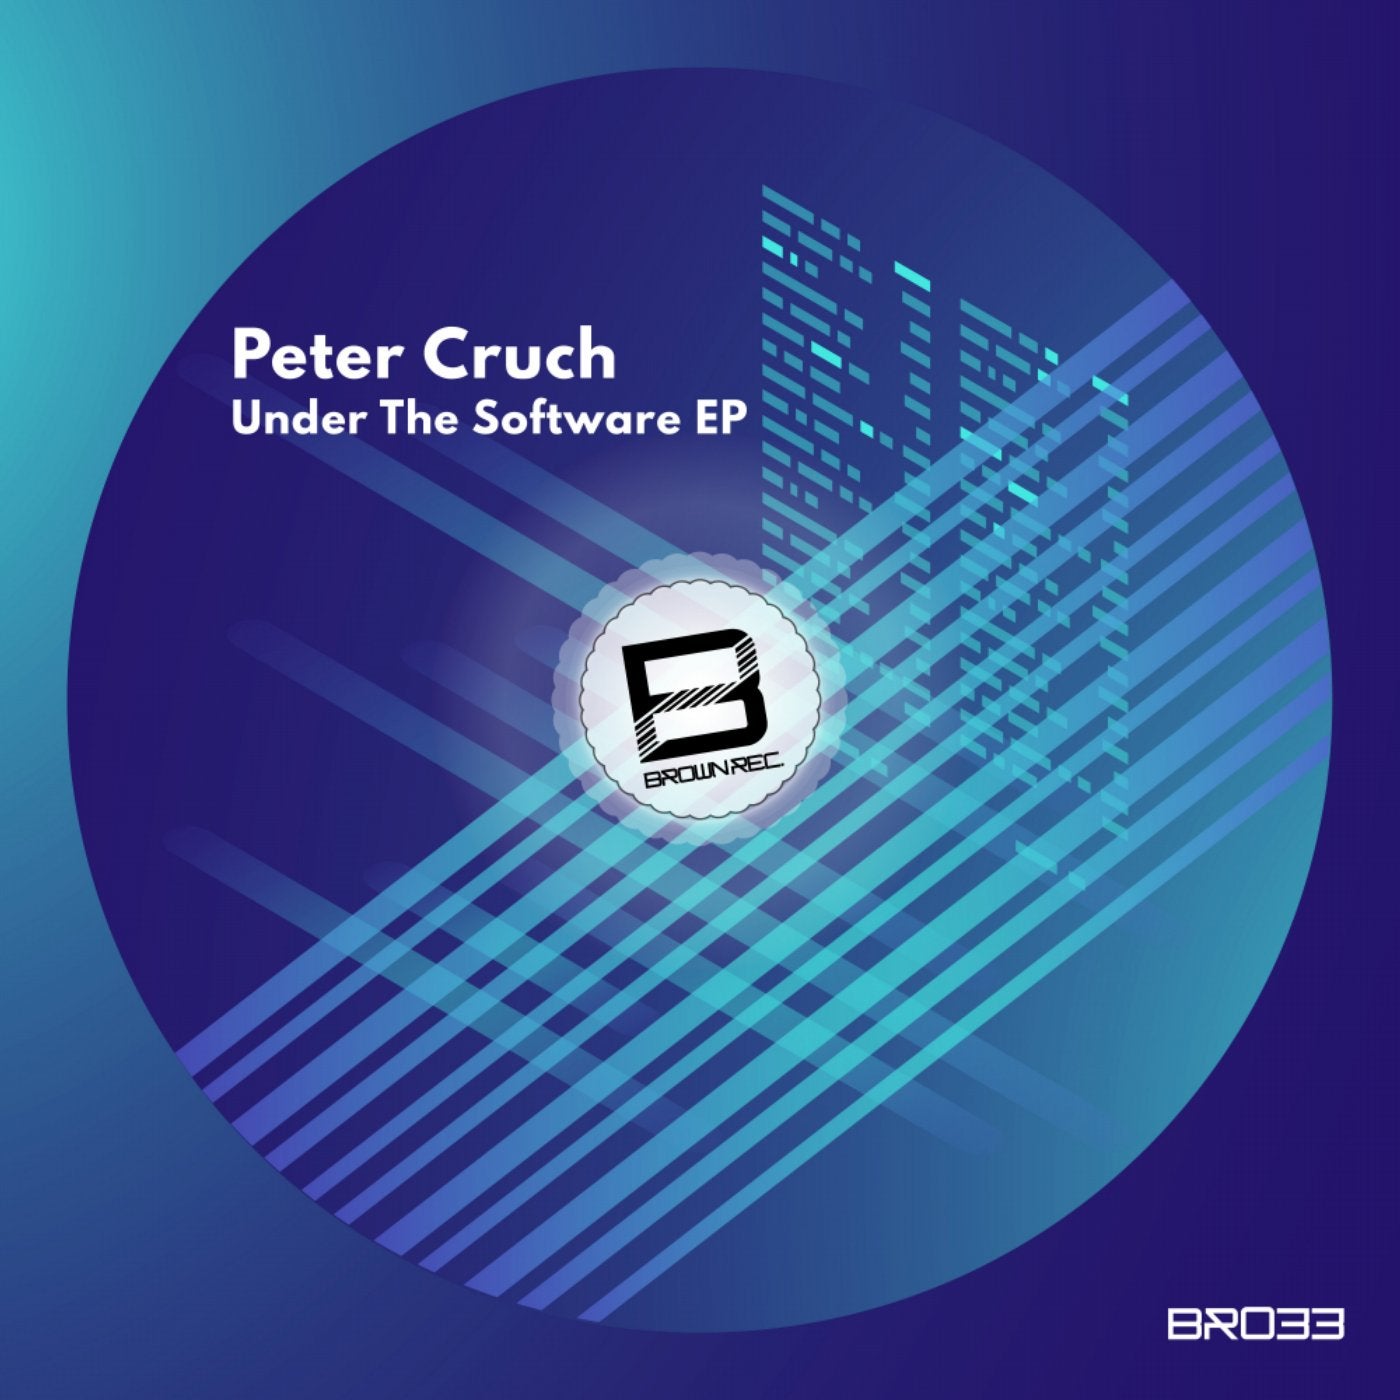 Under The Software EP